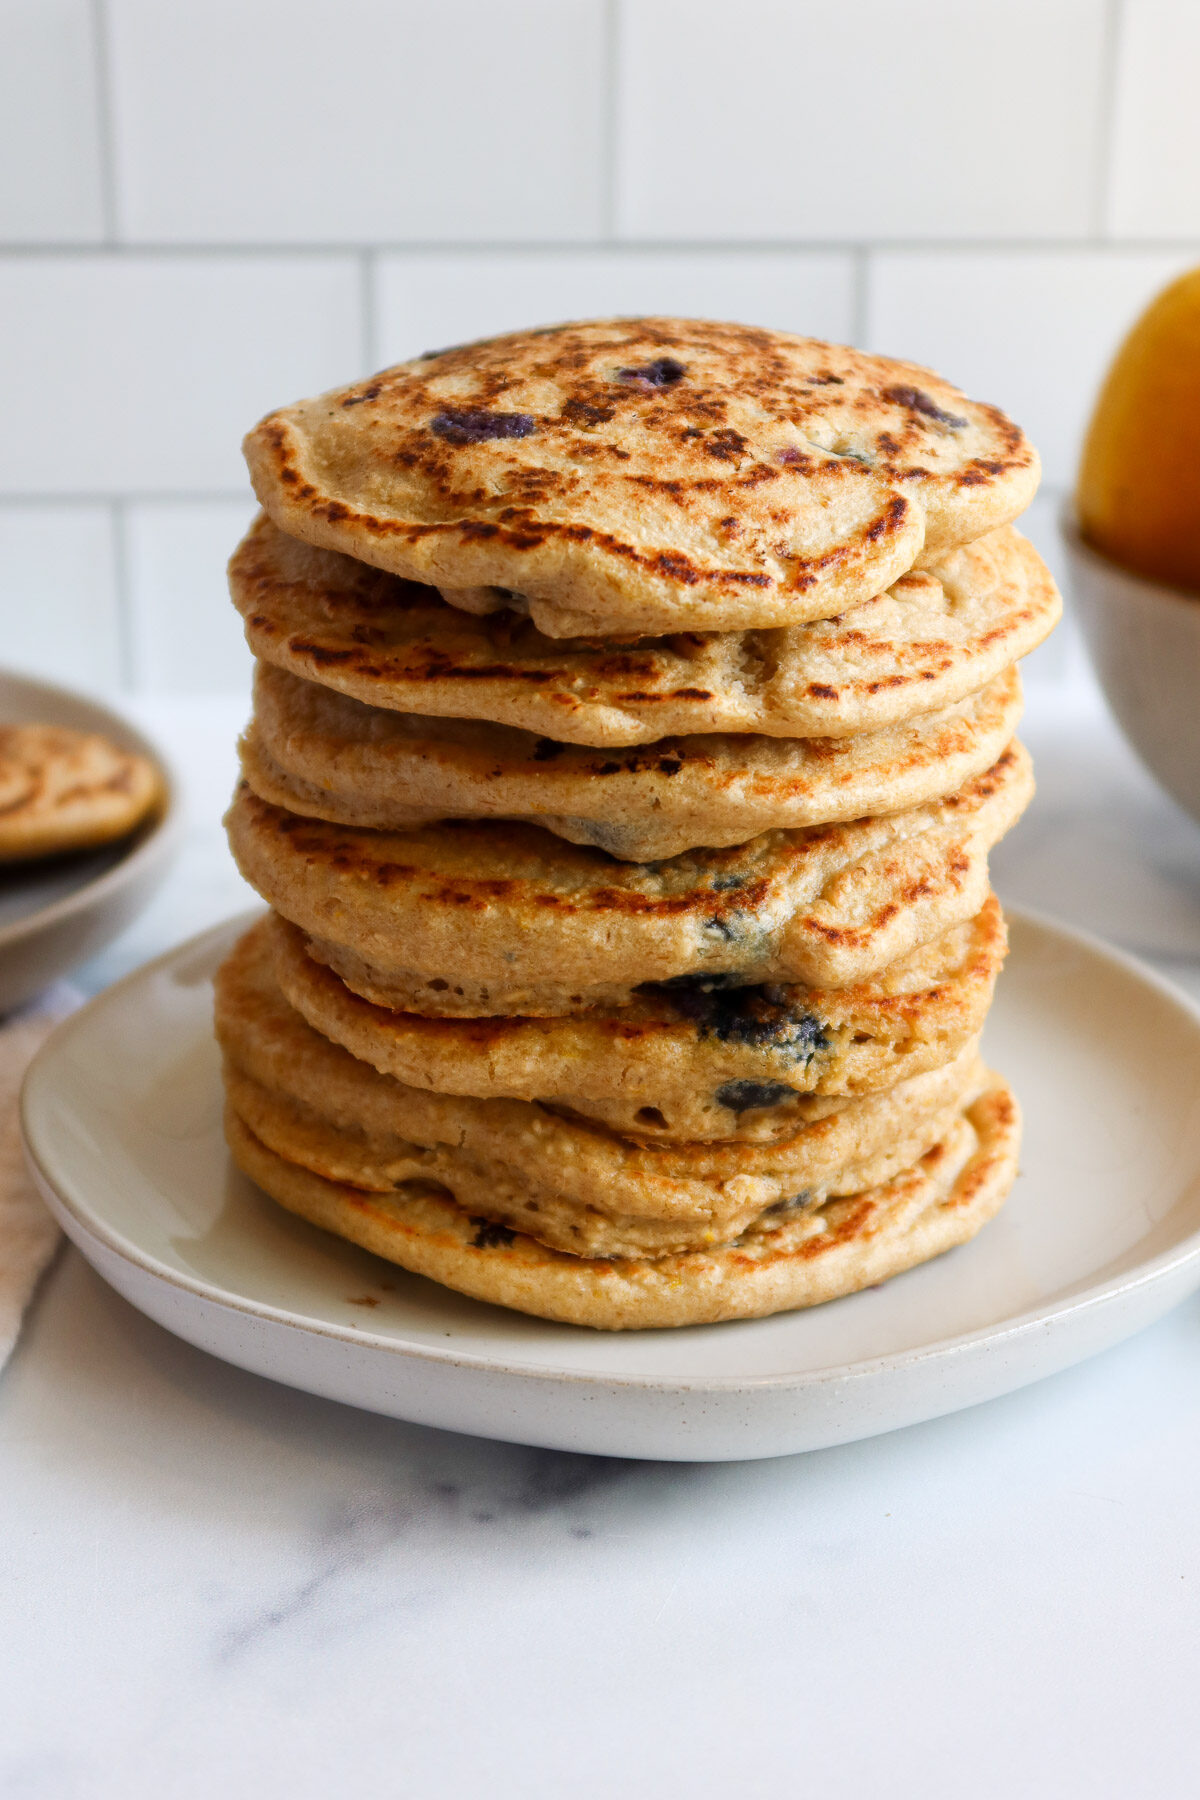 A stack of blueberry oatmeal pancakes.